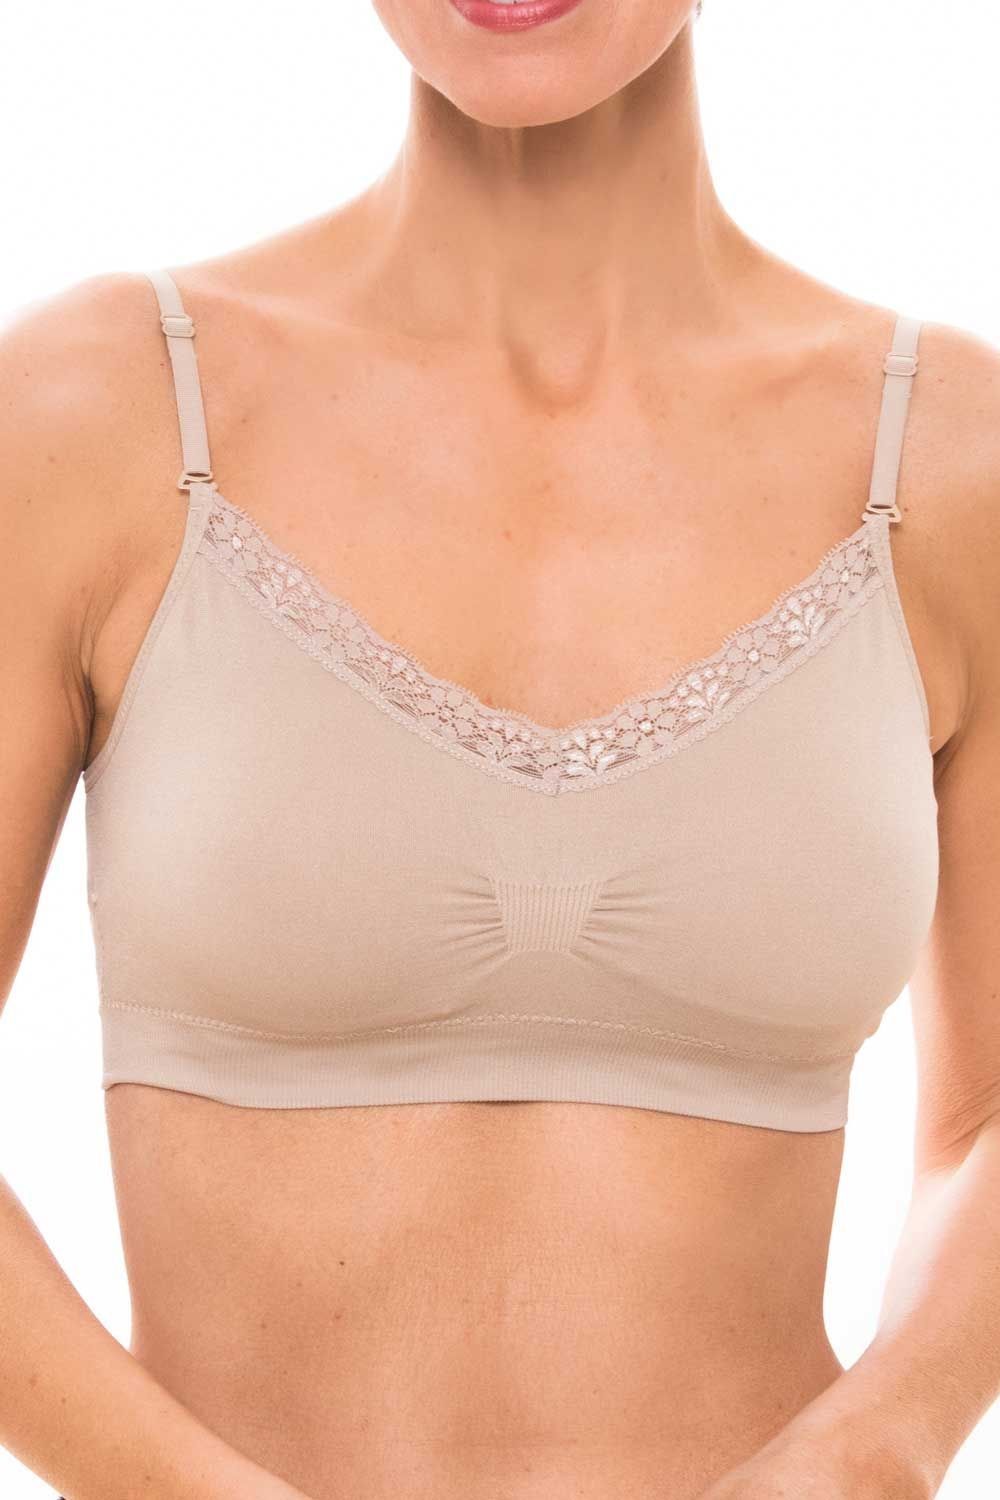 coobie bras - Shop, Welcome to The Coobie Bra Store, The World's Most  Comfortable Bra